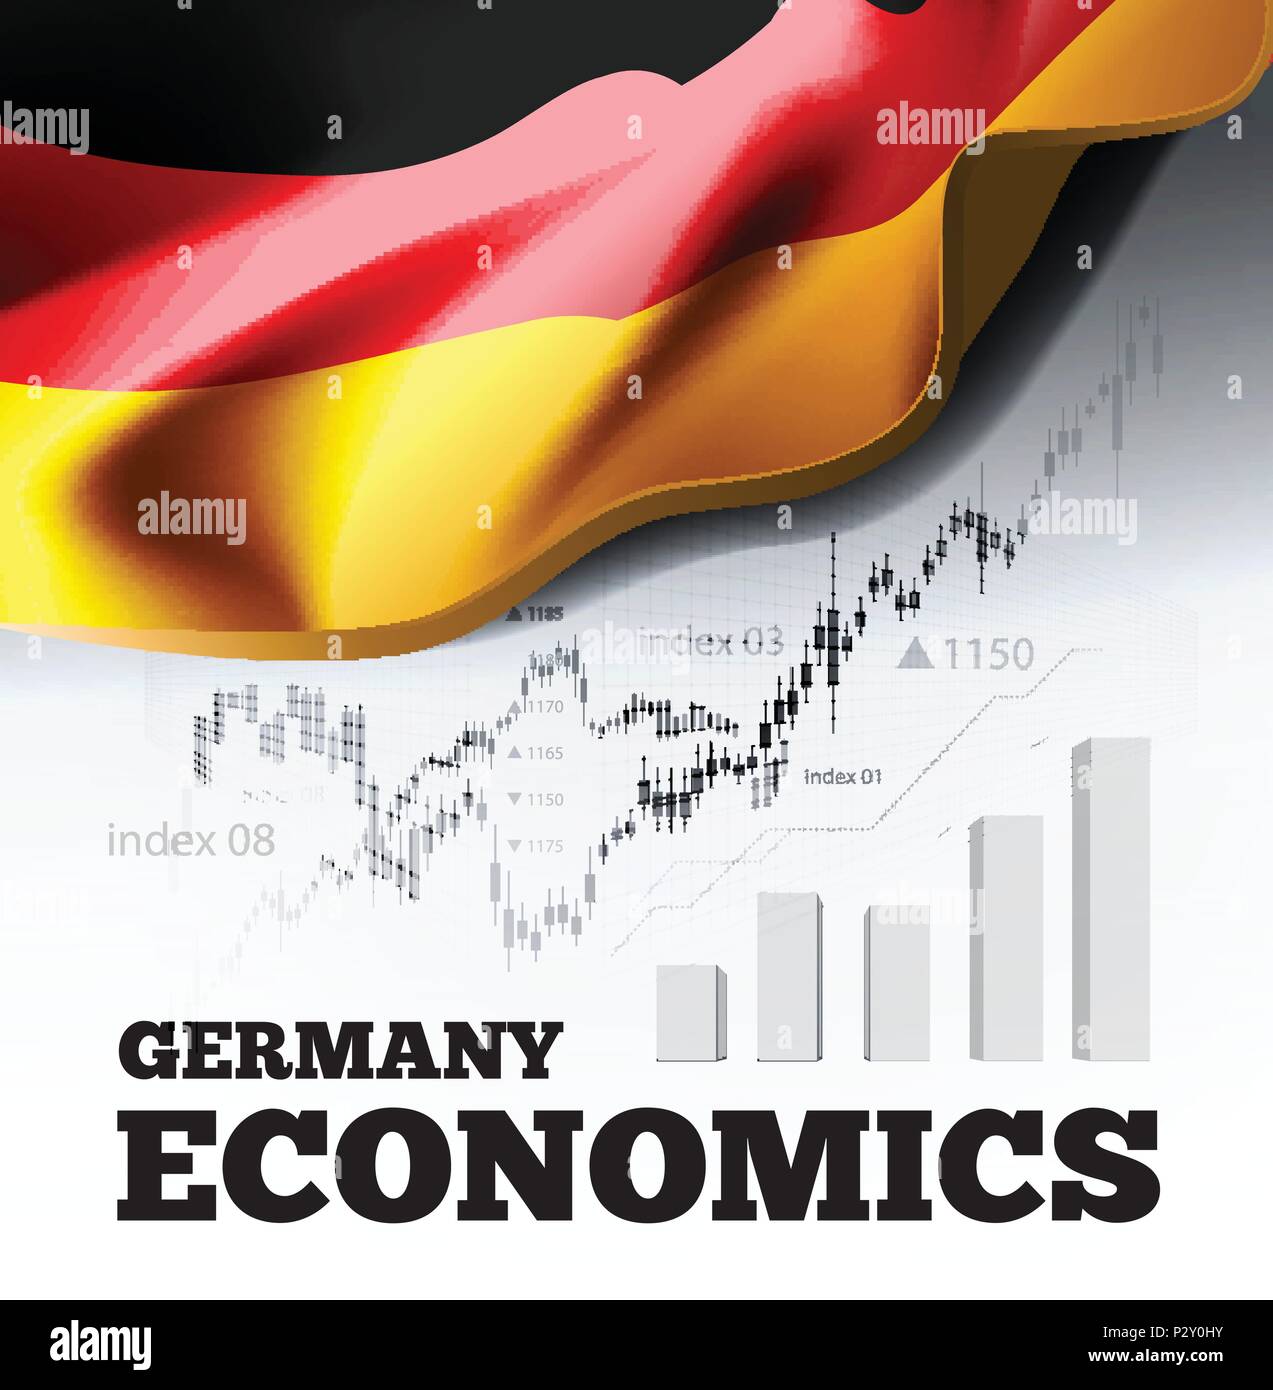 Germany economics vector illustration with german flag and business chart, bar chart stock numbers bull market, uptrend line graph symbolizes the growth Stock Vector